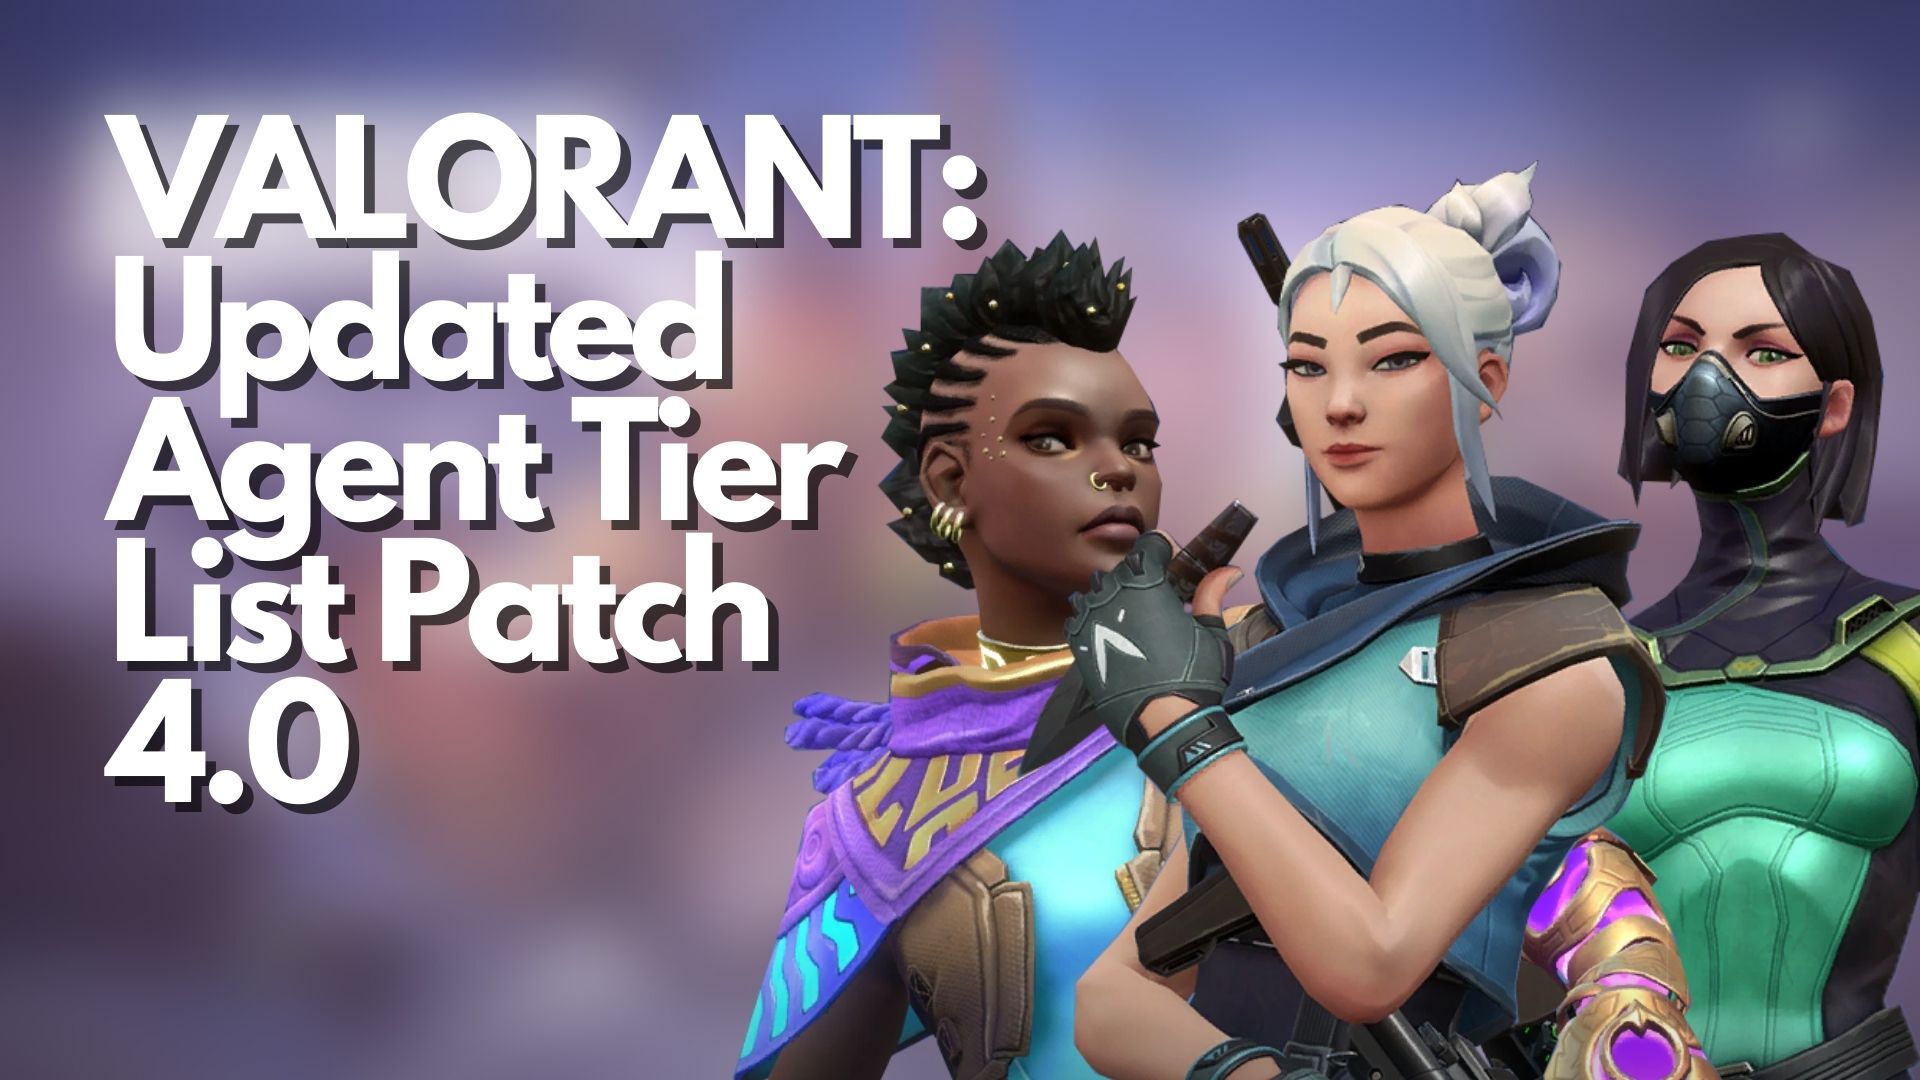 VALORANT: Updated Agent Tier List Patch 4.0 for 2022